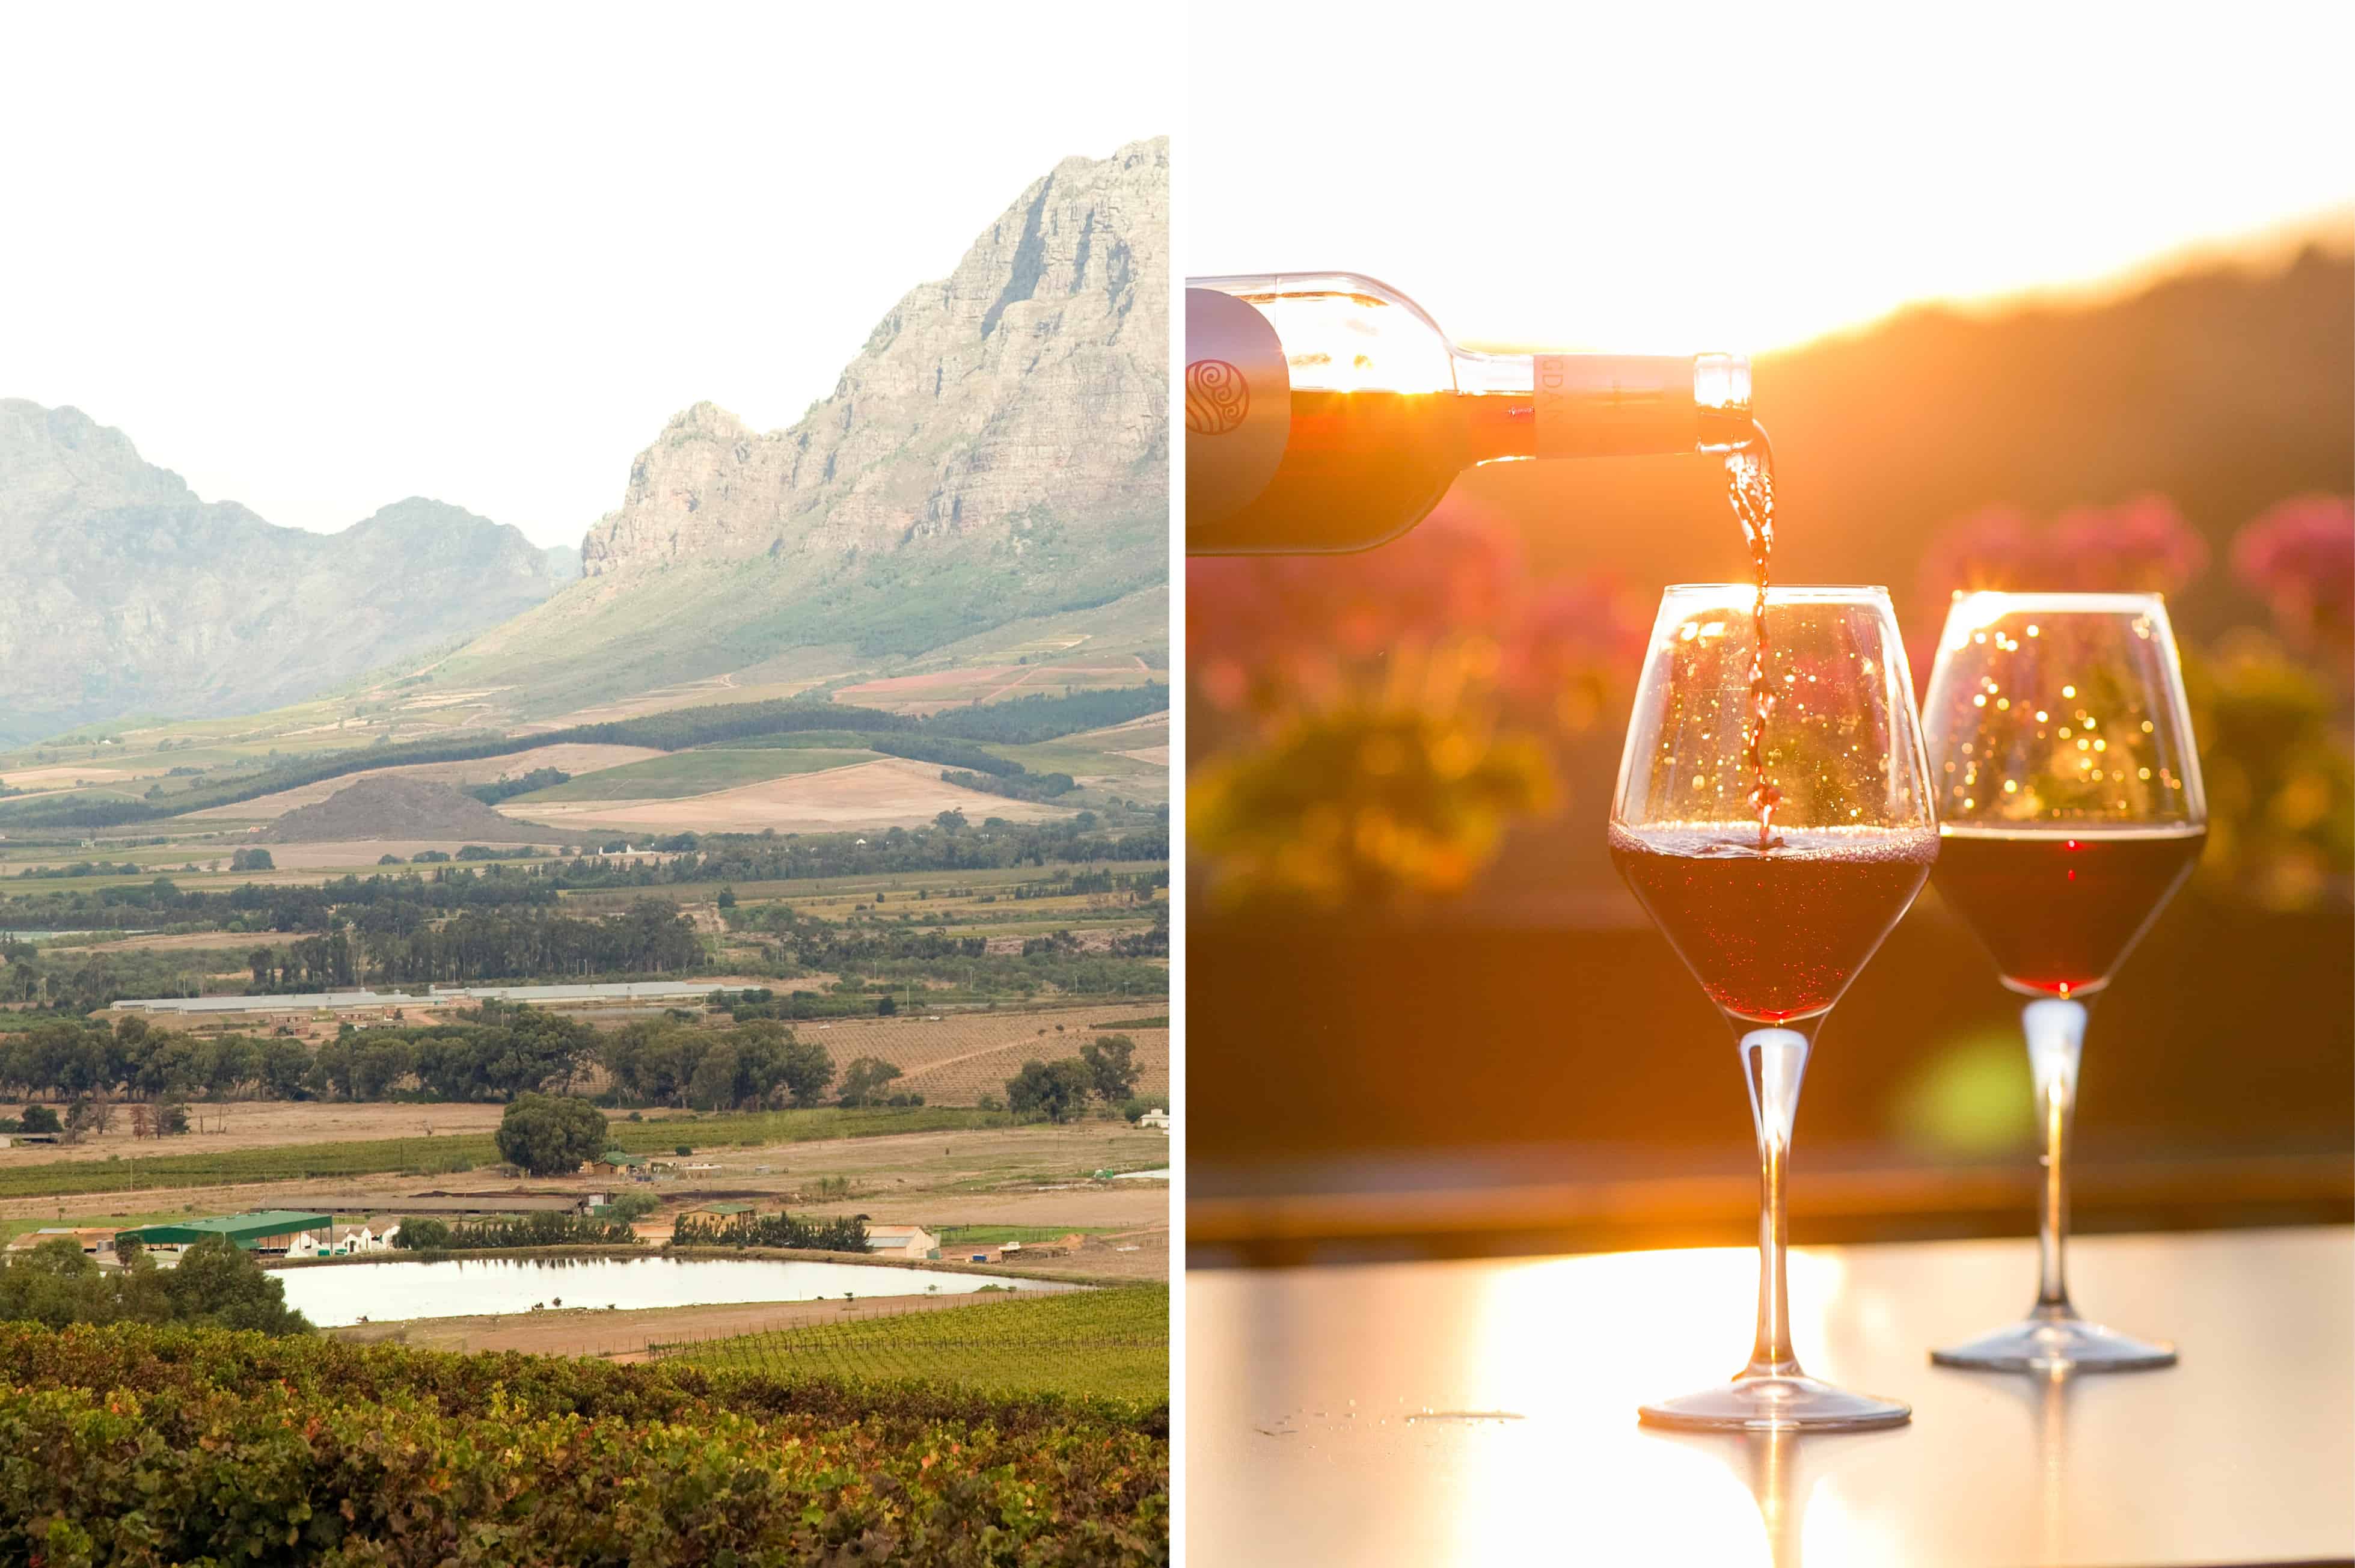 Lake in a valley and red wine being poured into glasses near Cape Town South Africa